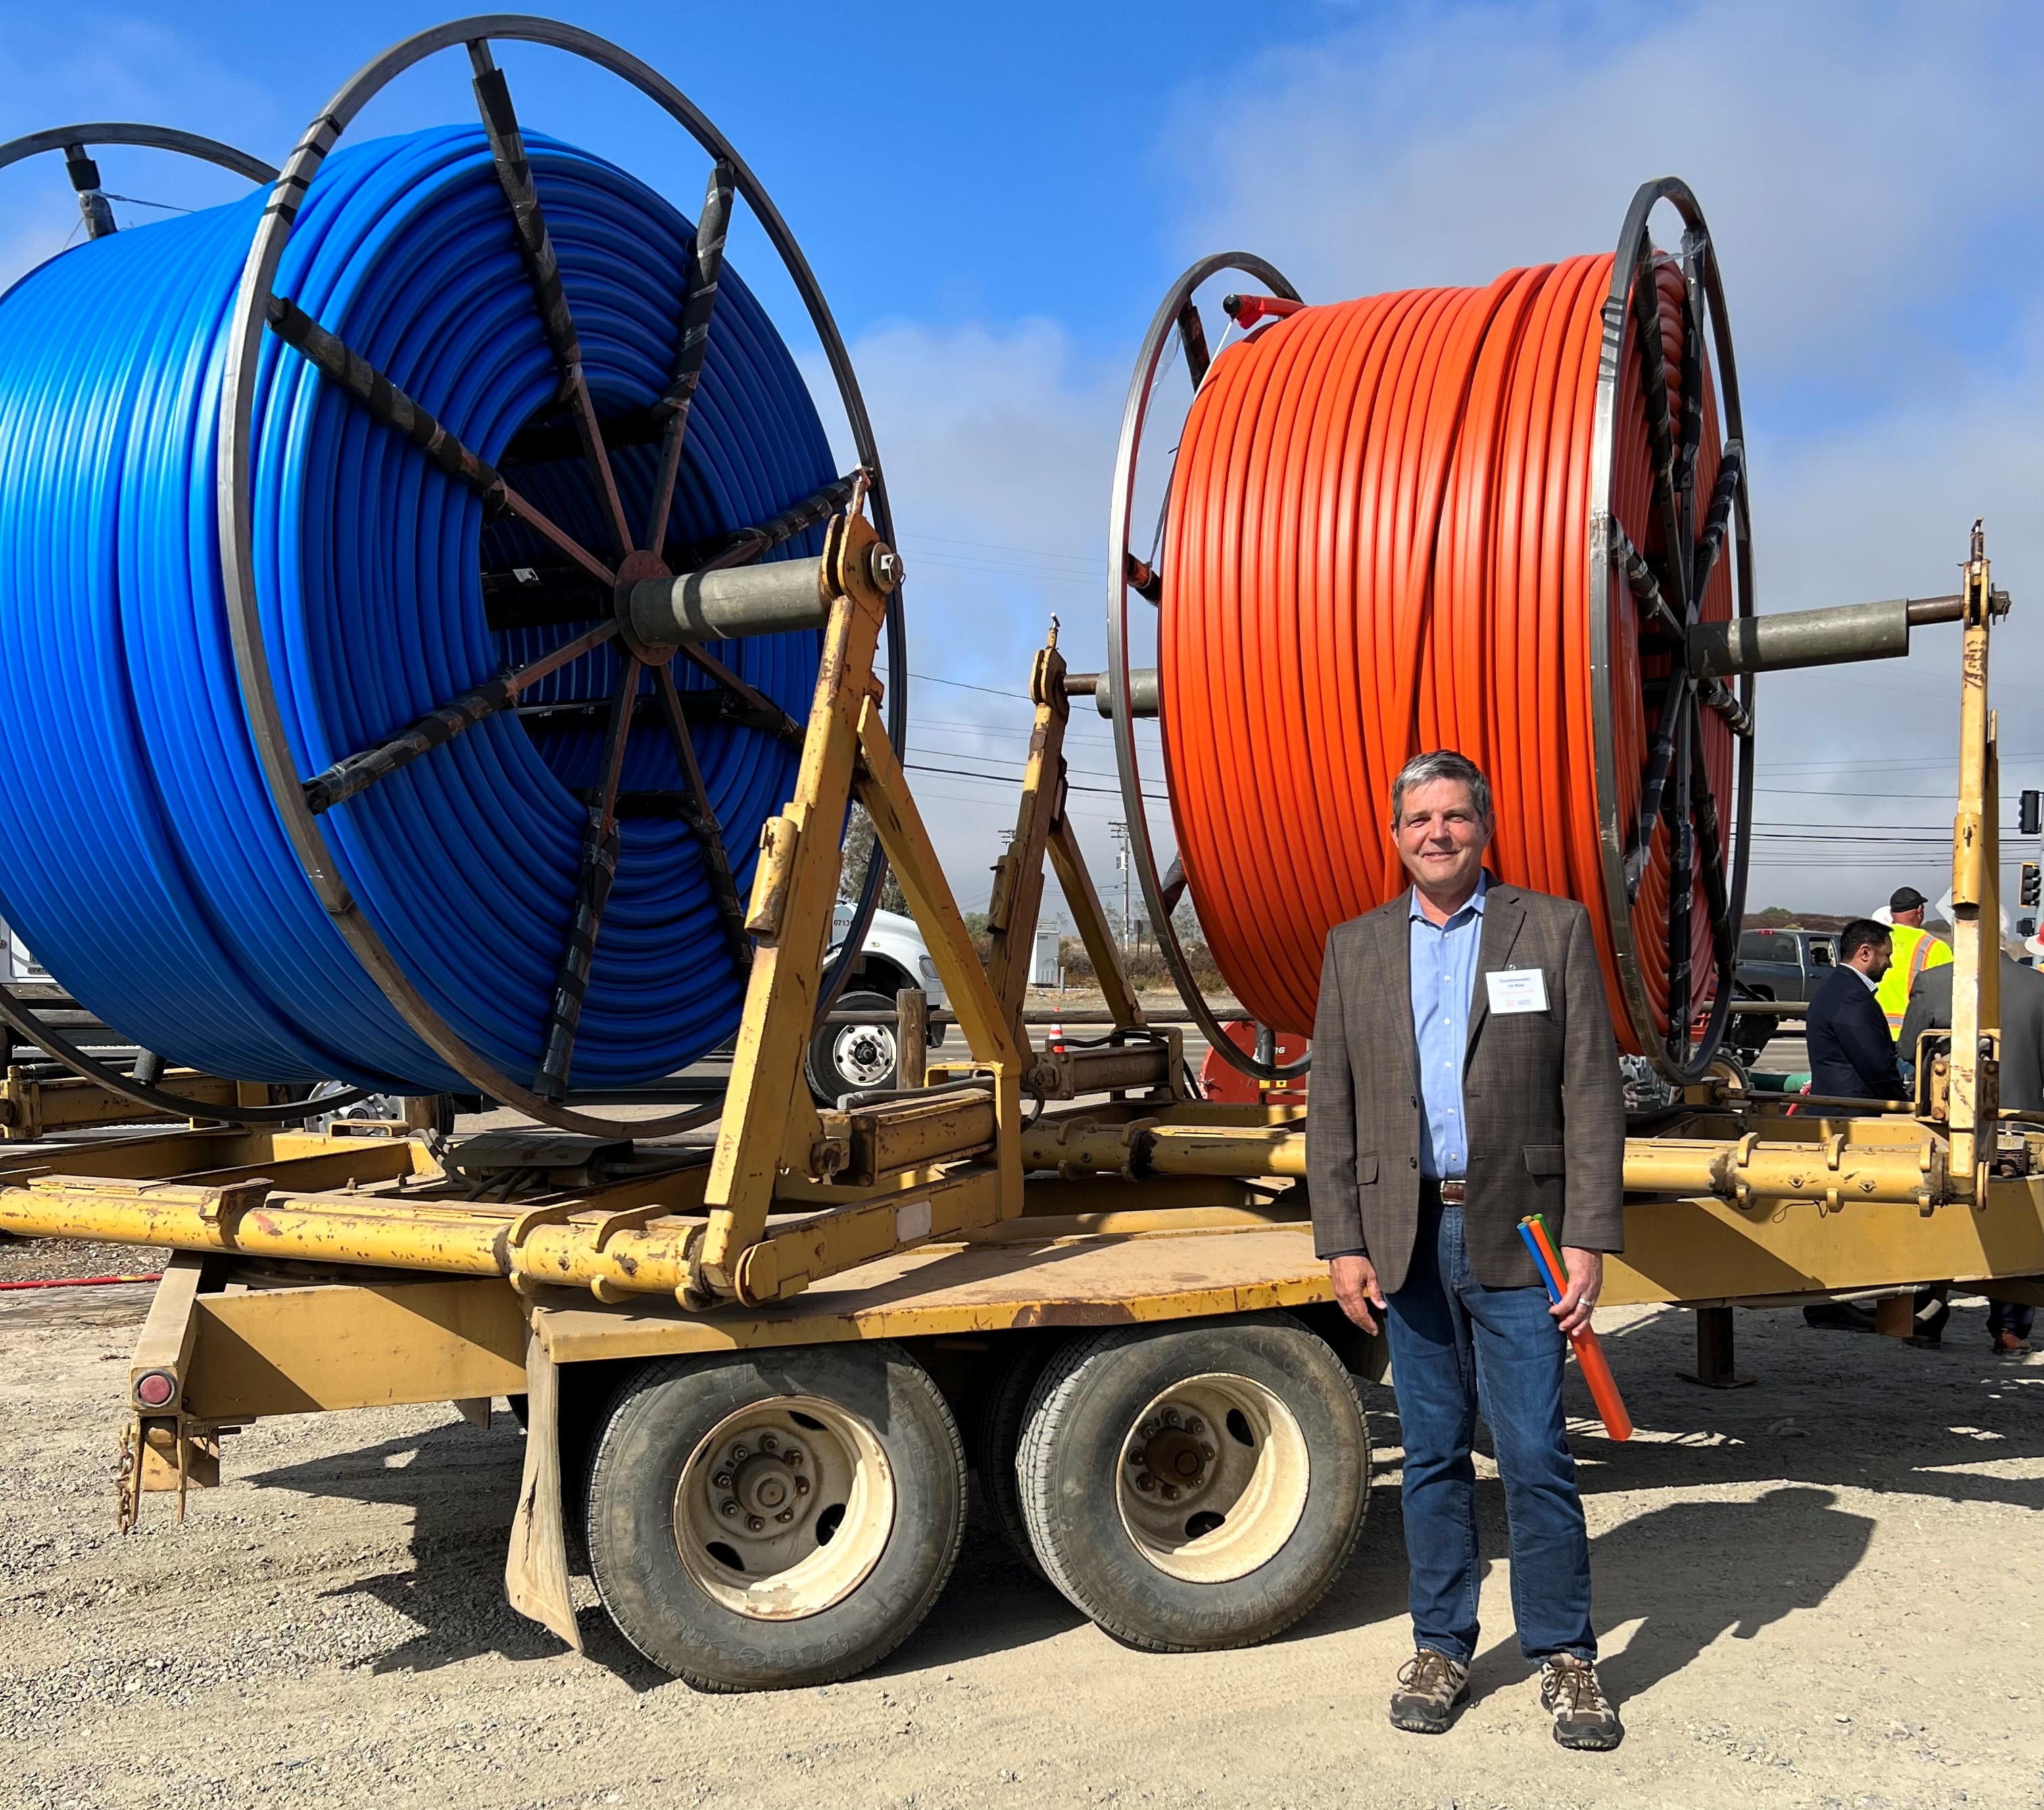 Assemblymember Jim Wood stands in front of miles of fiber optic cable